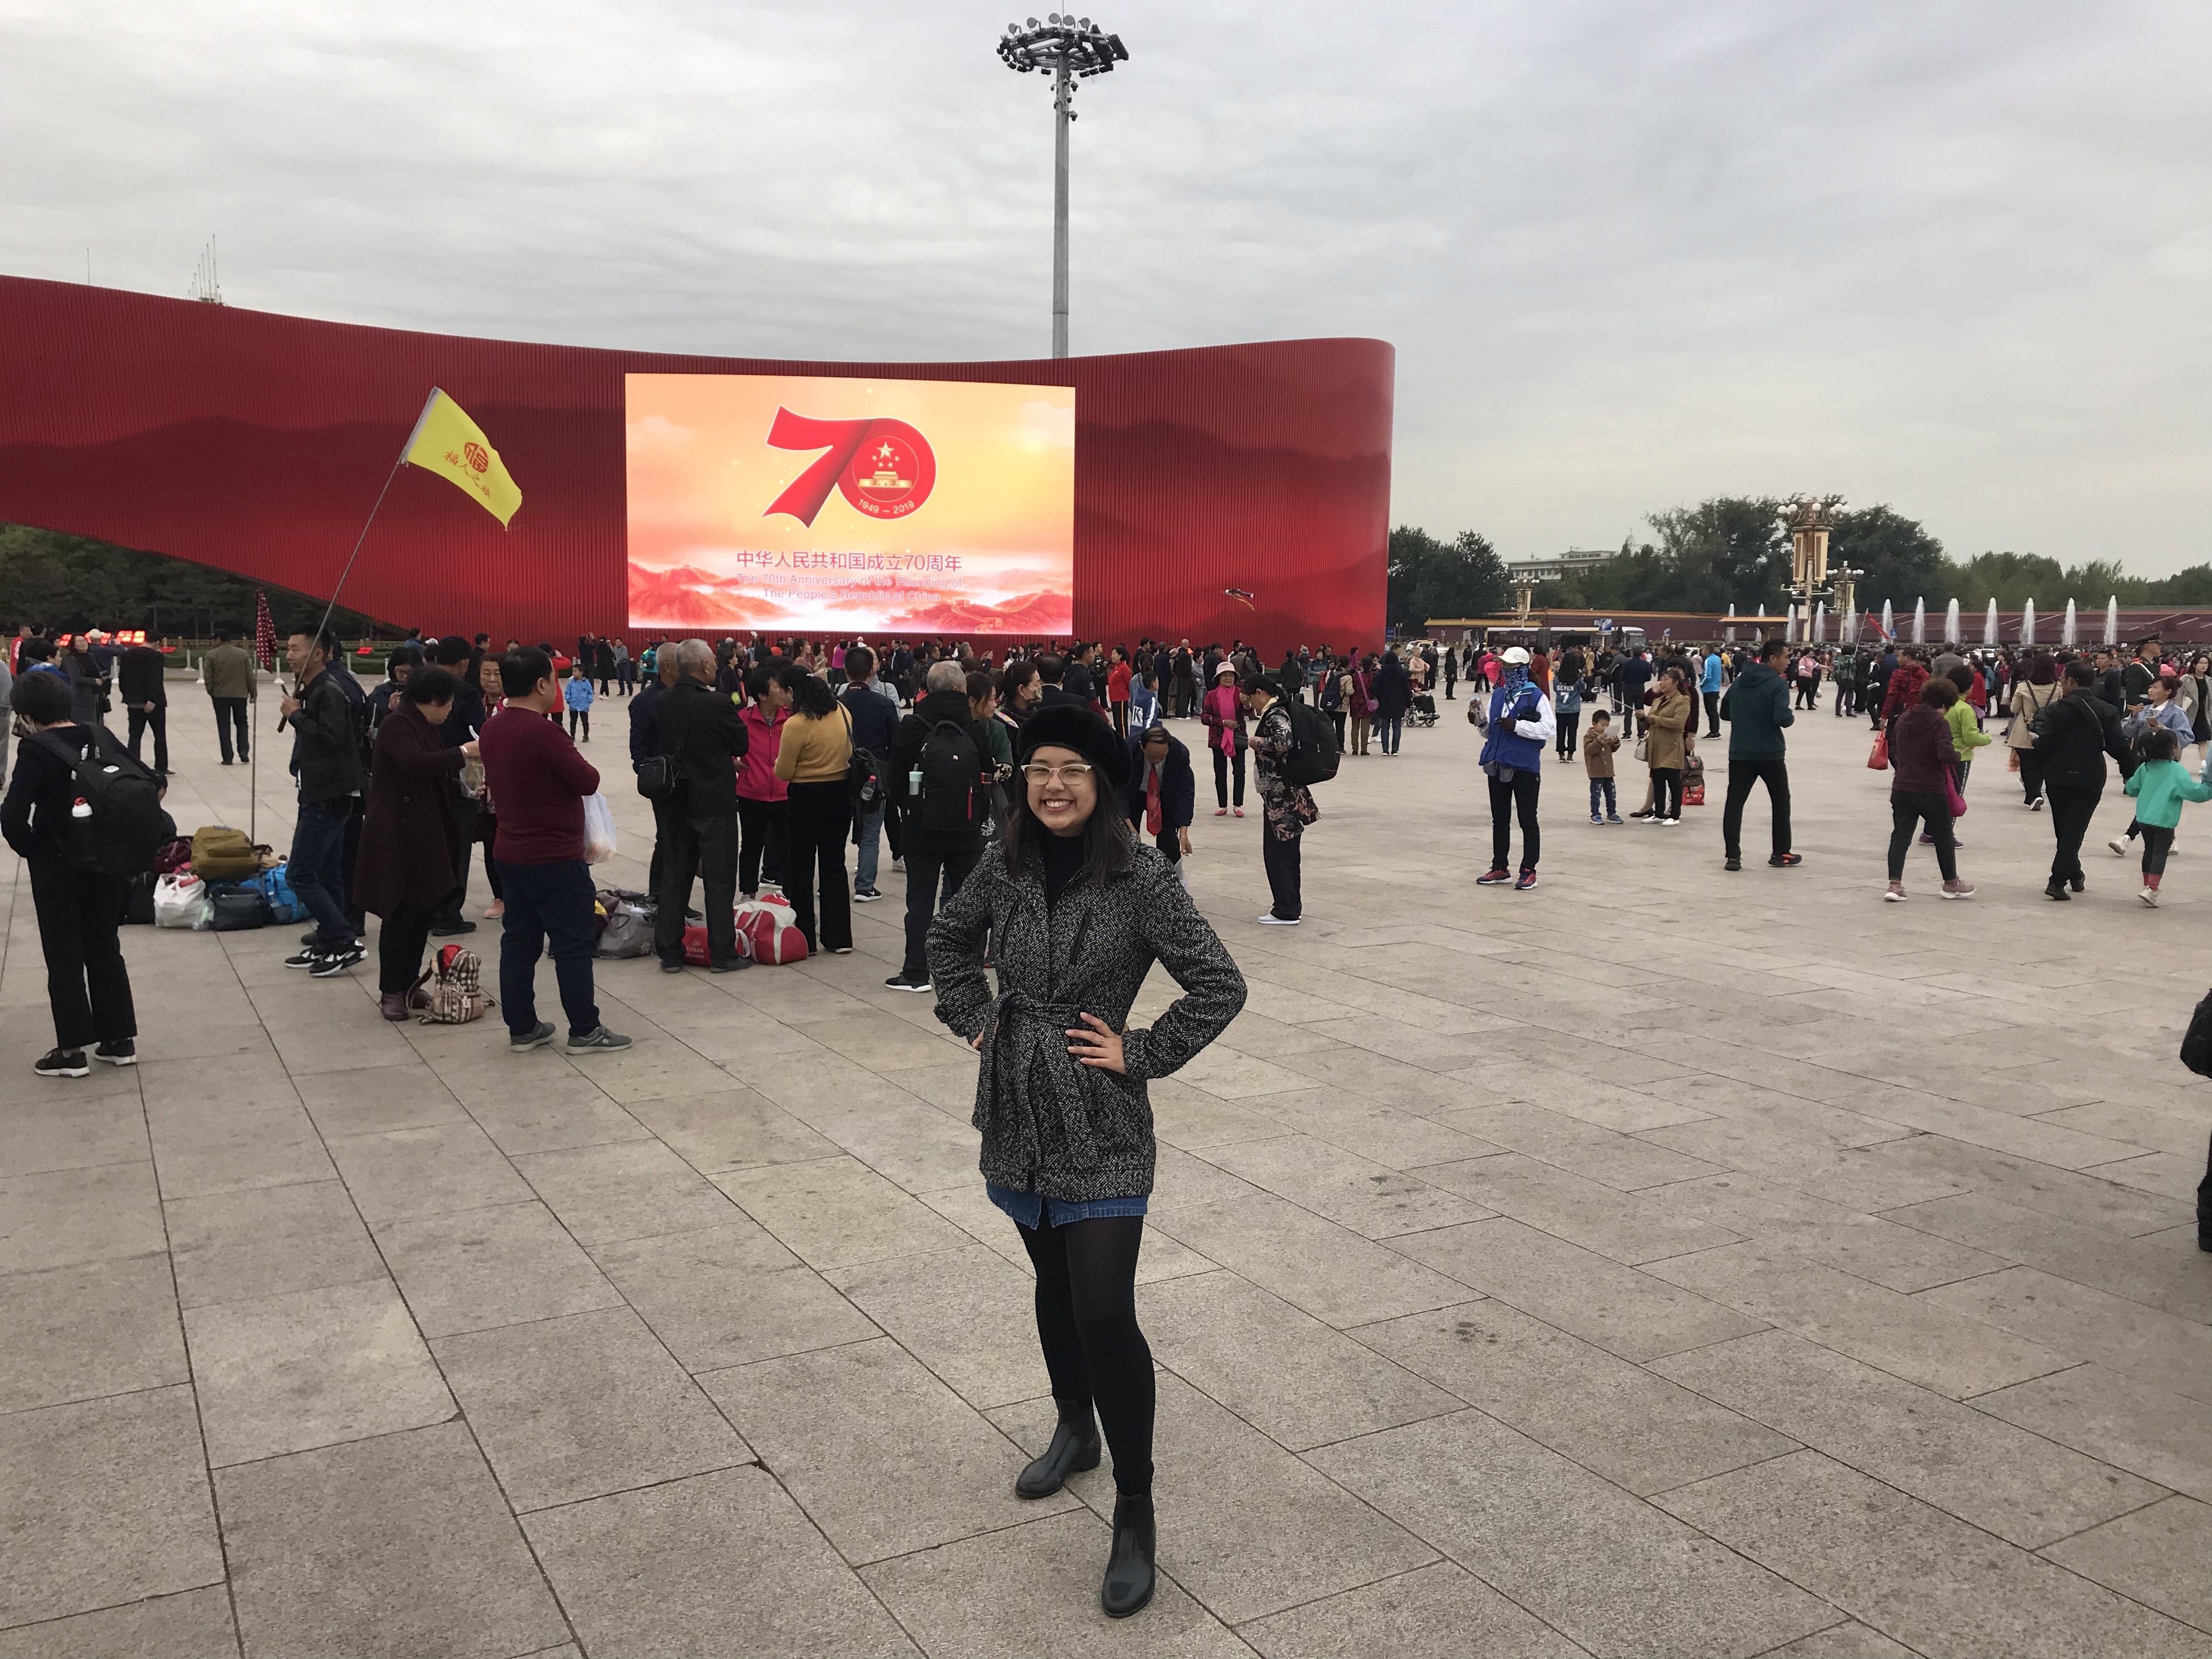 Tiananmen Square for the 70th anniversary with students and many visitors.